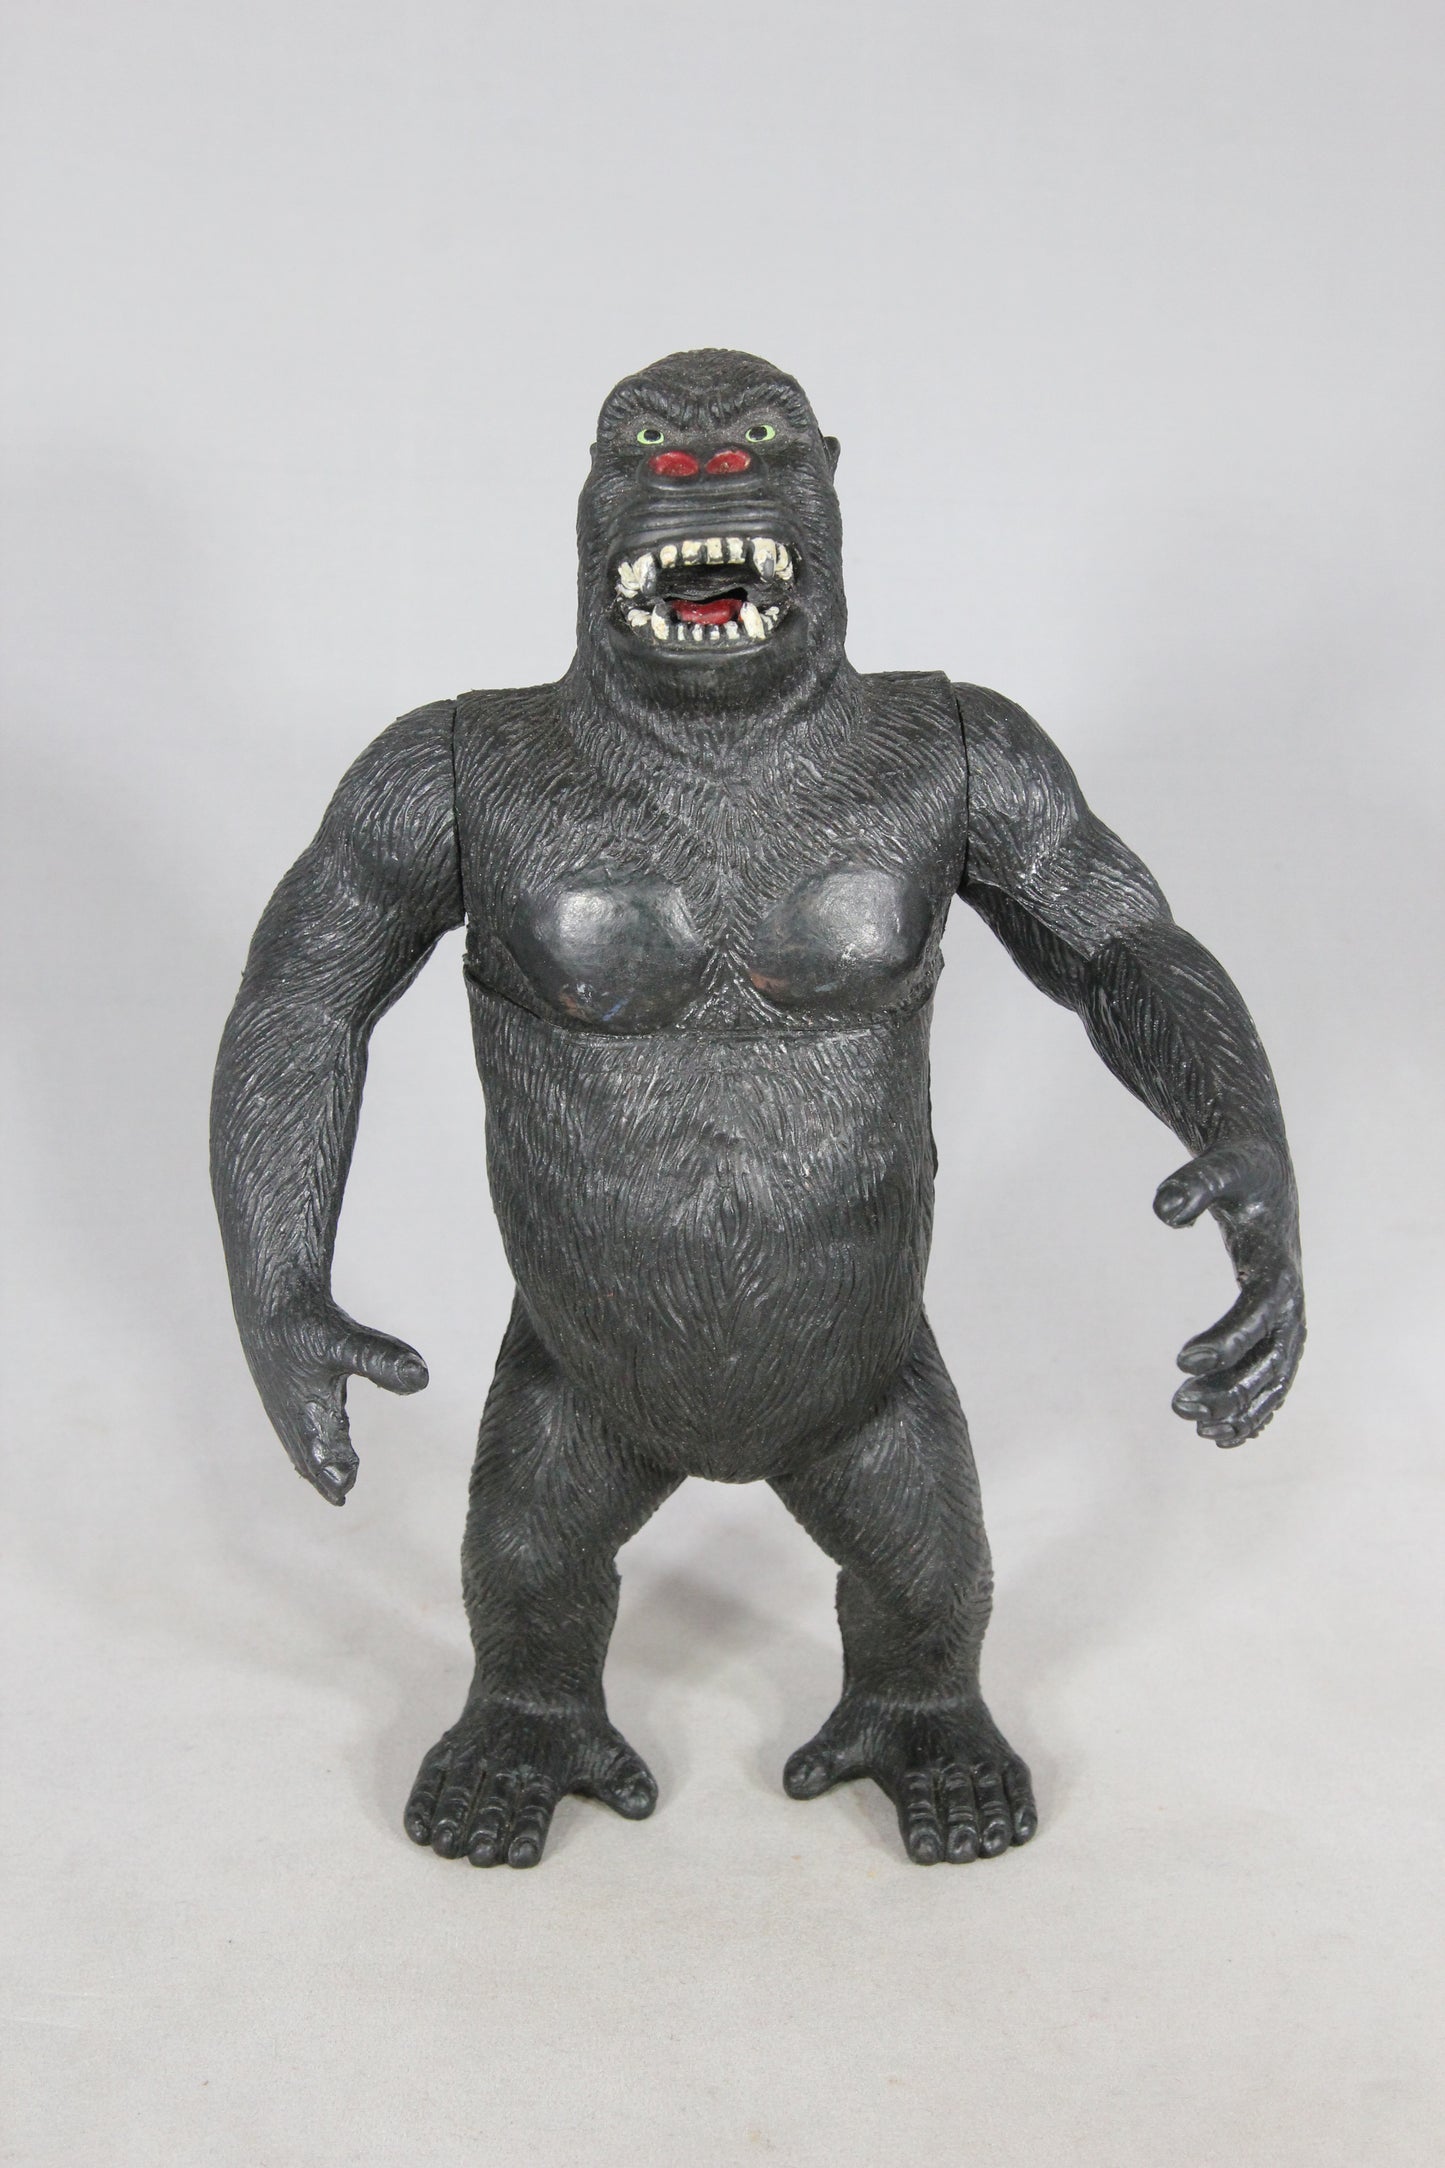 King Kong Vinyl Action Figure by Imperial, 1980s, 8"